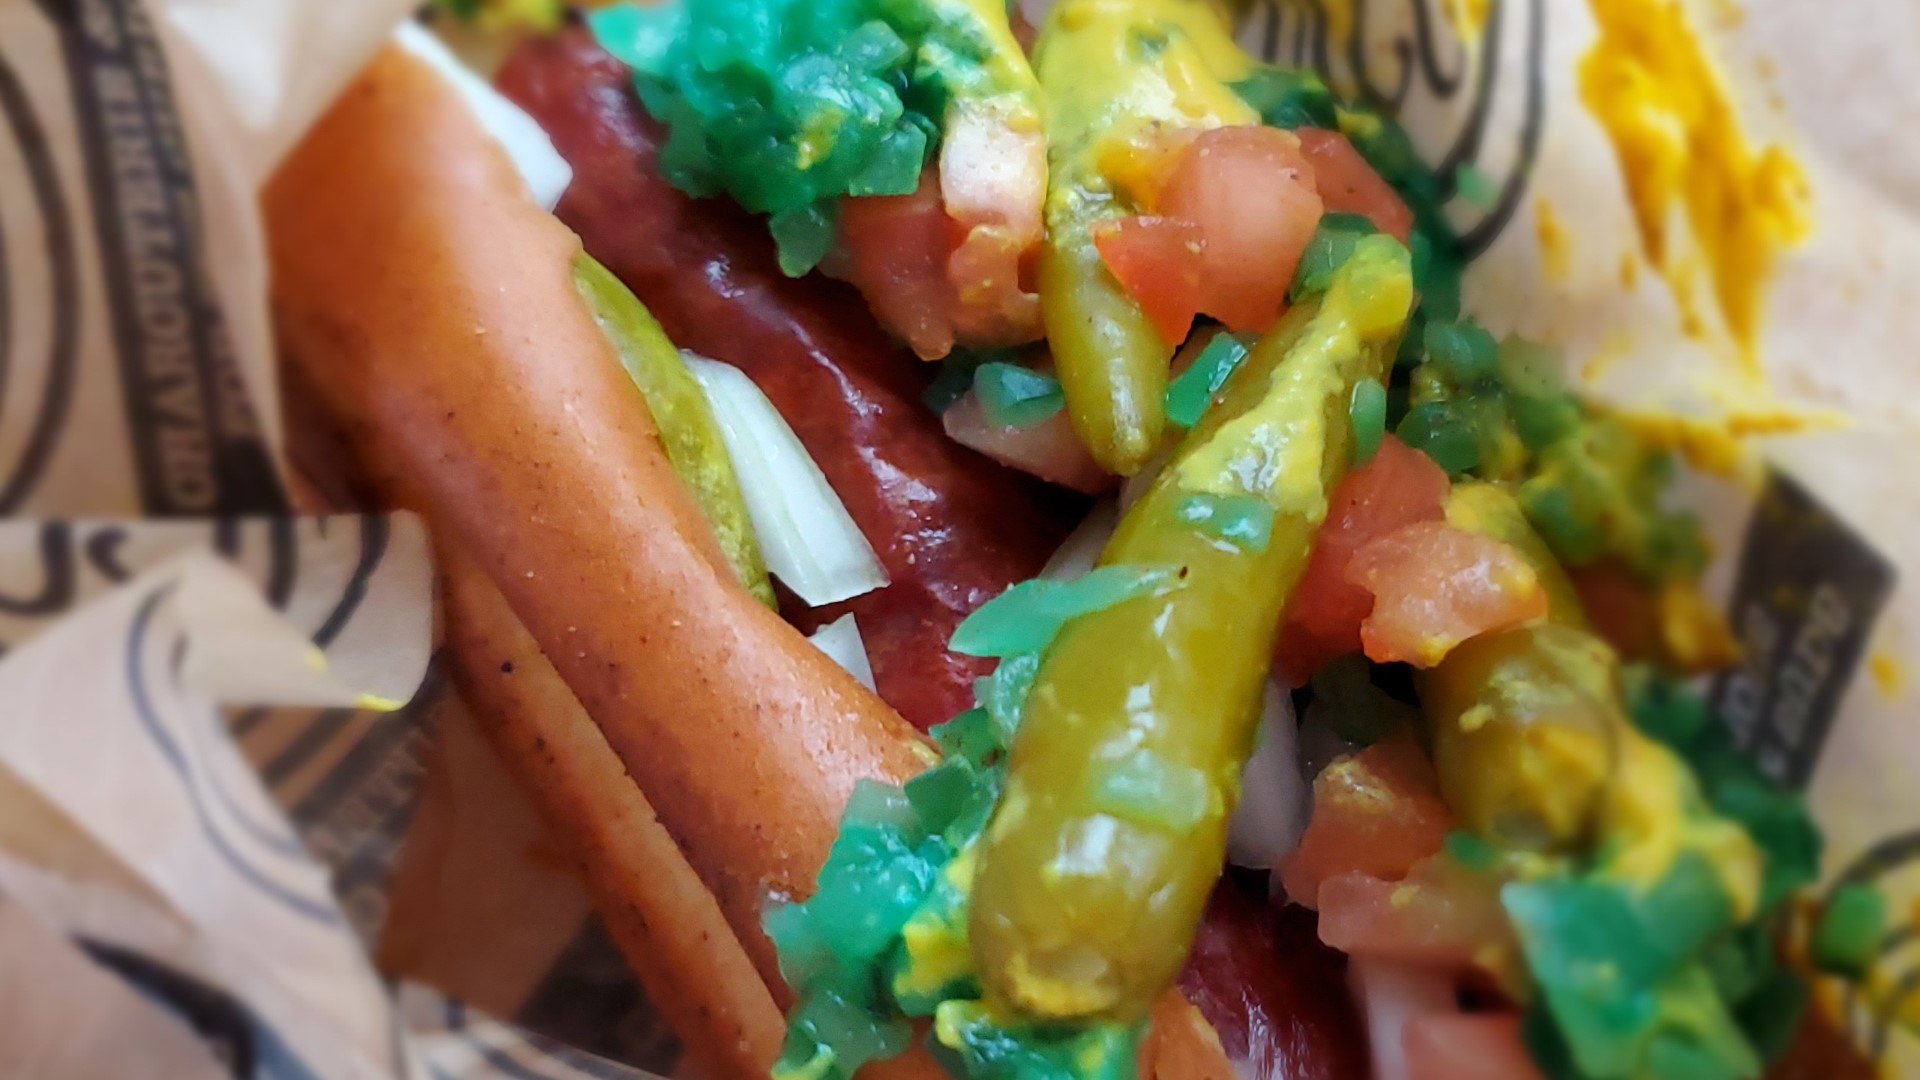 From a classic Chicago hot dog to a spicy take on chili cheese fries, Swig has mastered the art of summer comfort food.